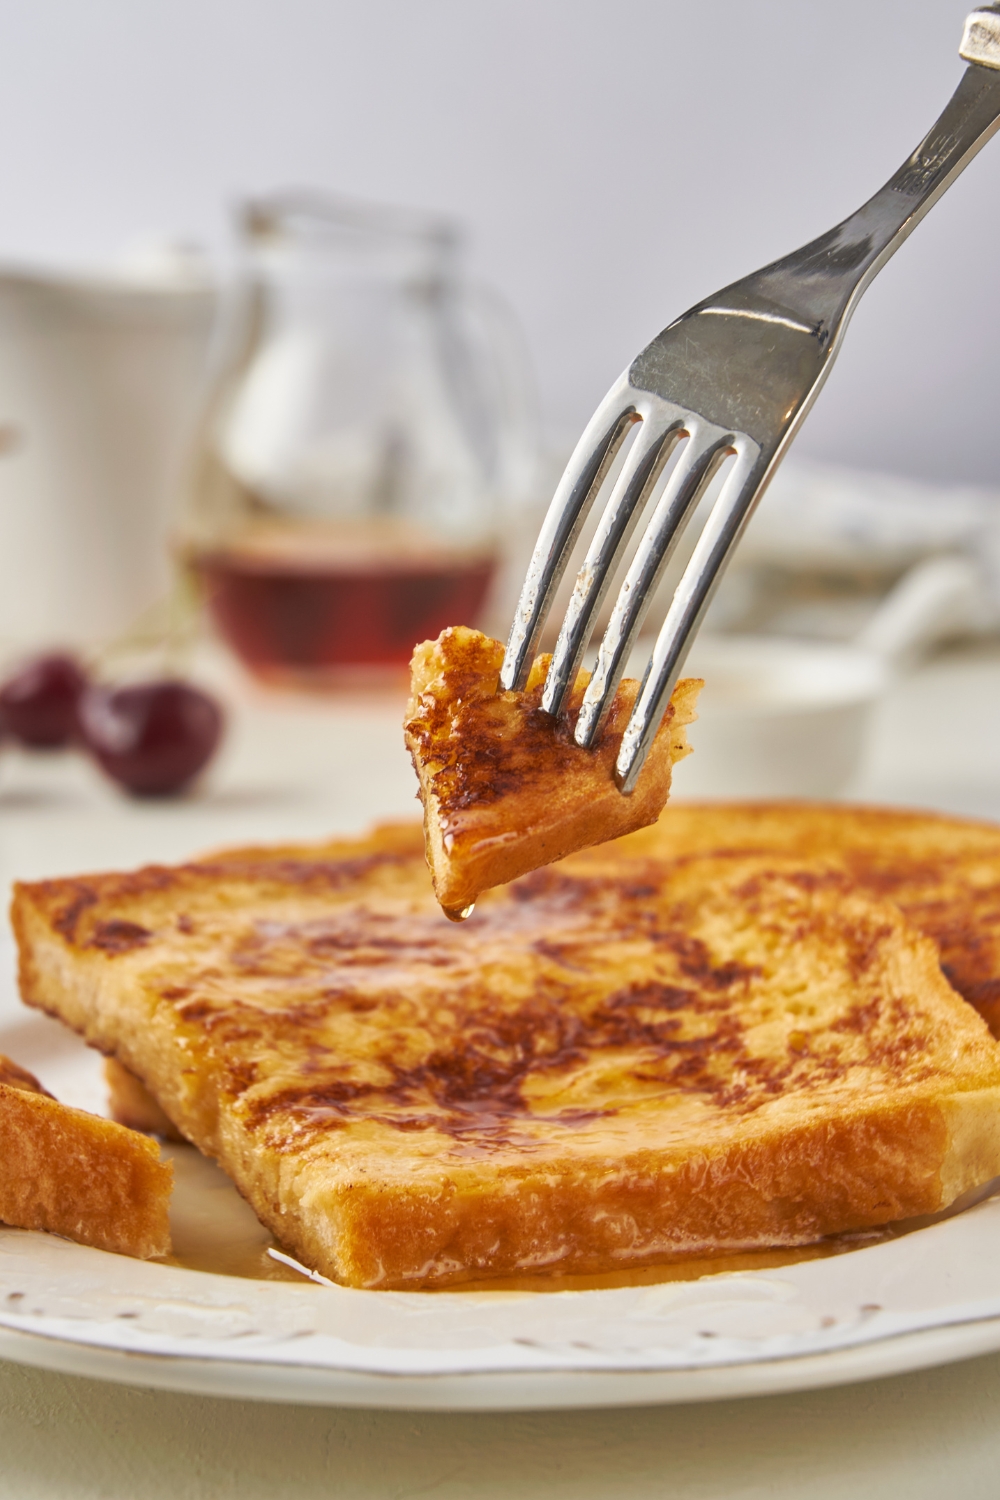 A plate with two slices of french toast and a fork removing a bite of it.